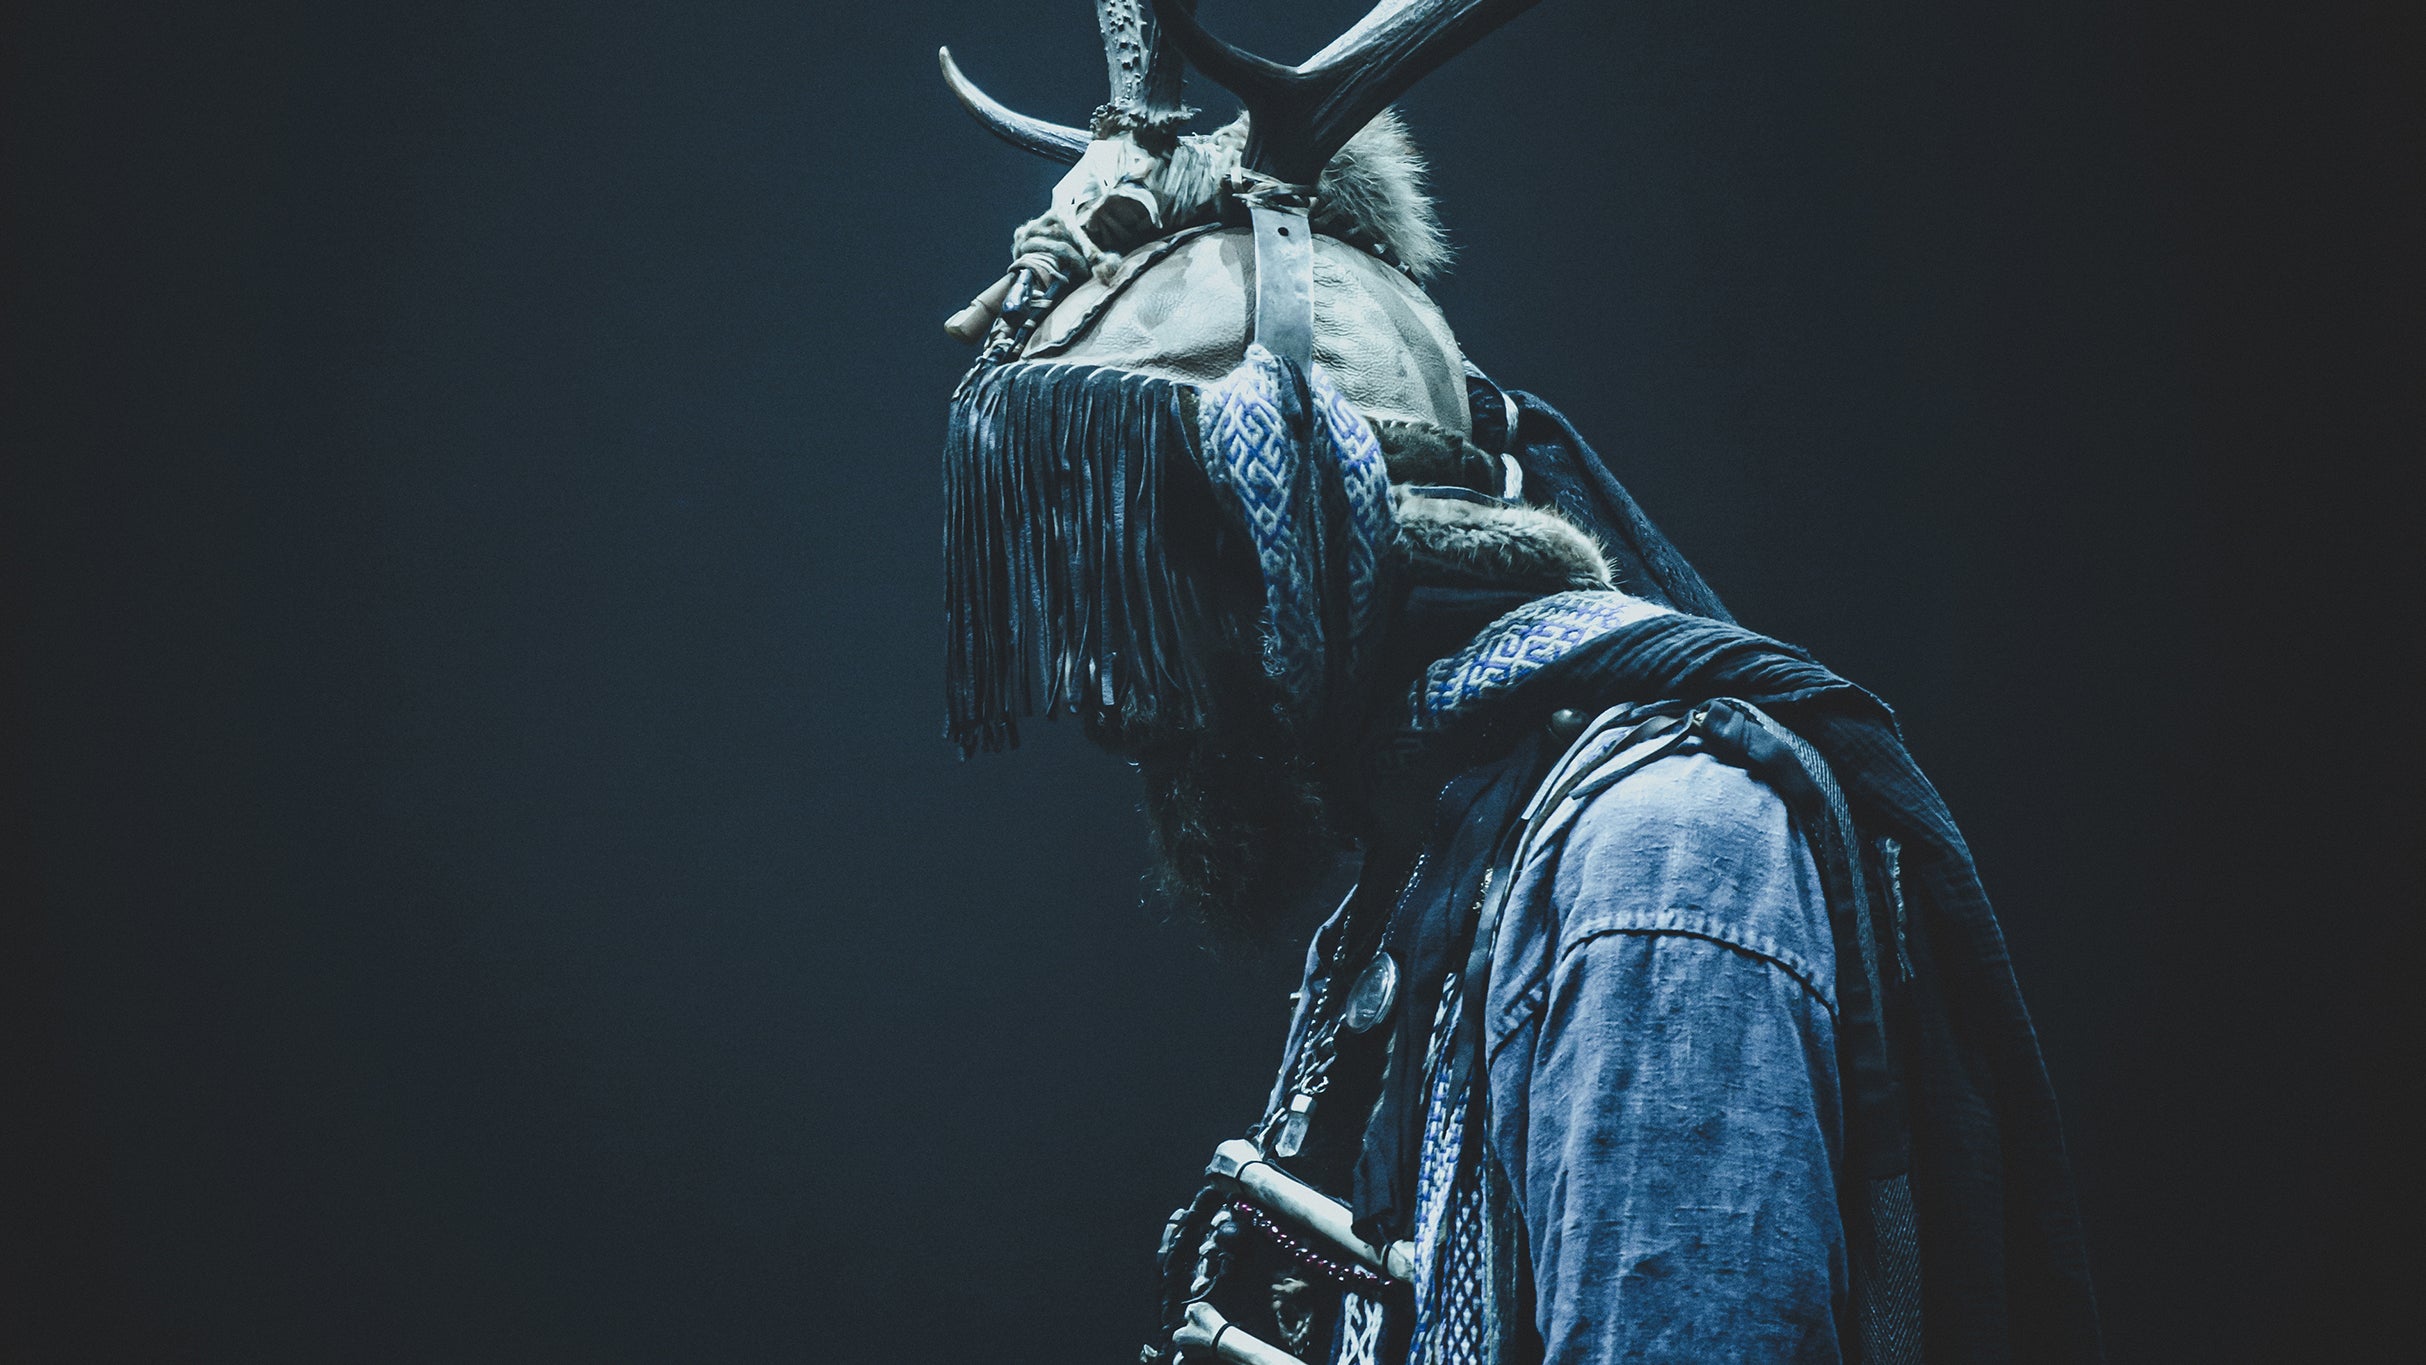 Heilung at DAR Constitution Hall